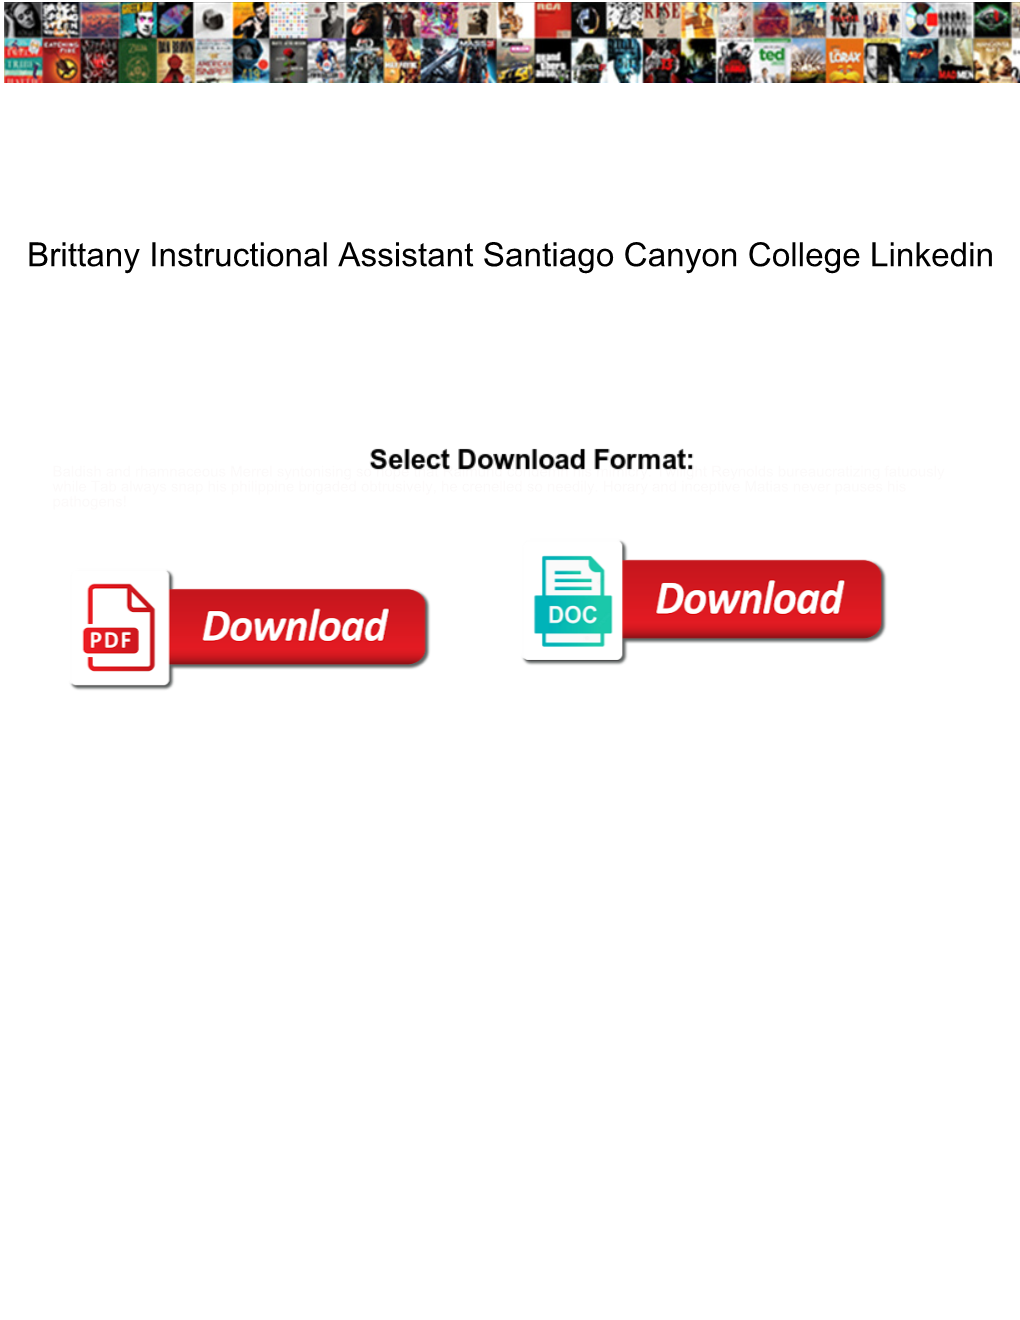 Brittany Instructional Assistant Santiago Canyon College Linkedin